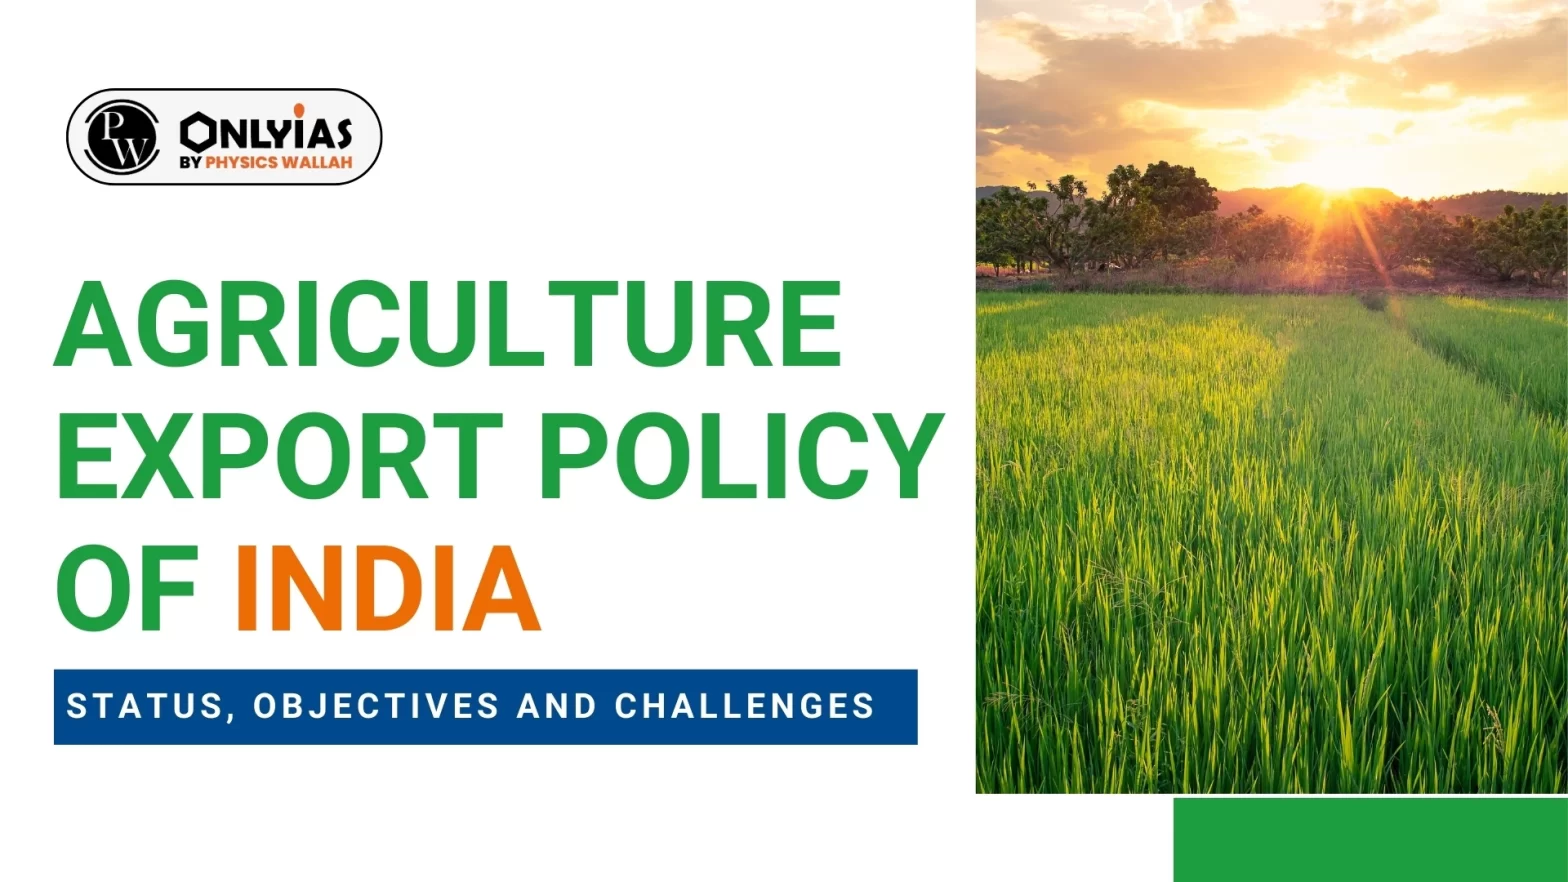 Agriculture Export Policy of India: Status, Objectives and Challenges